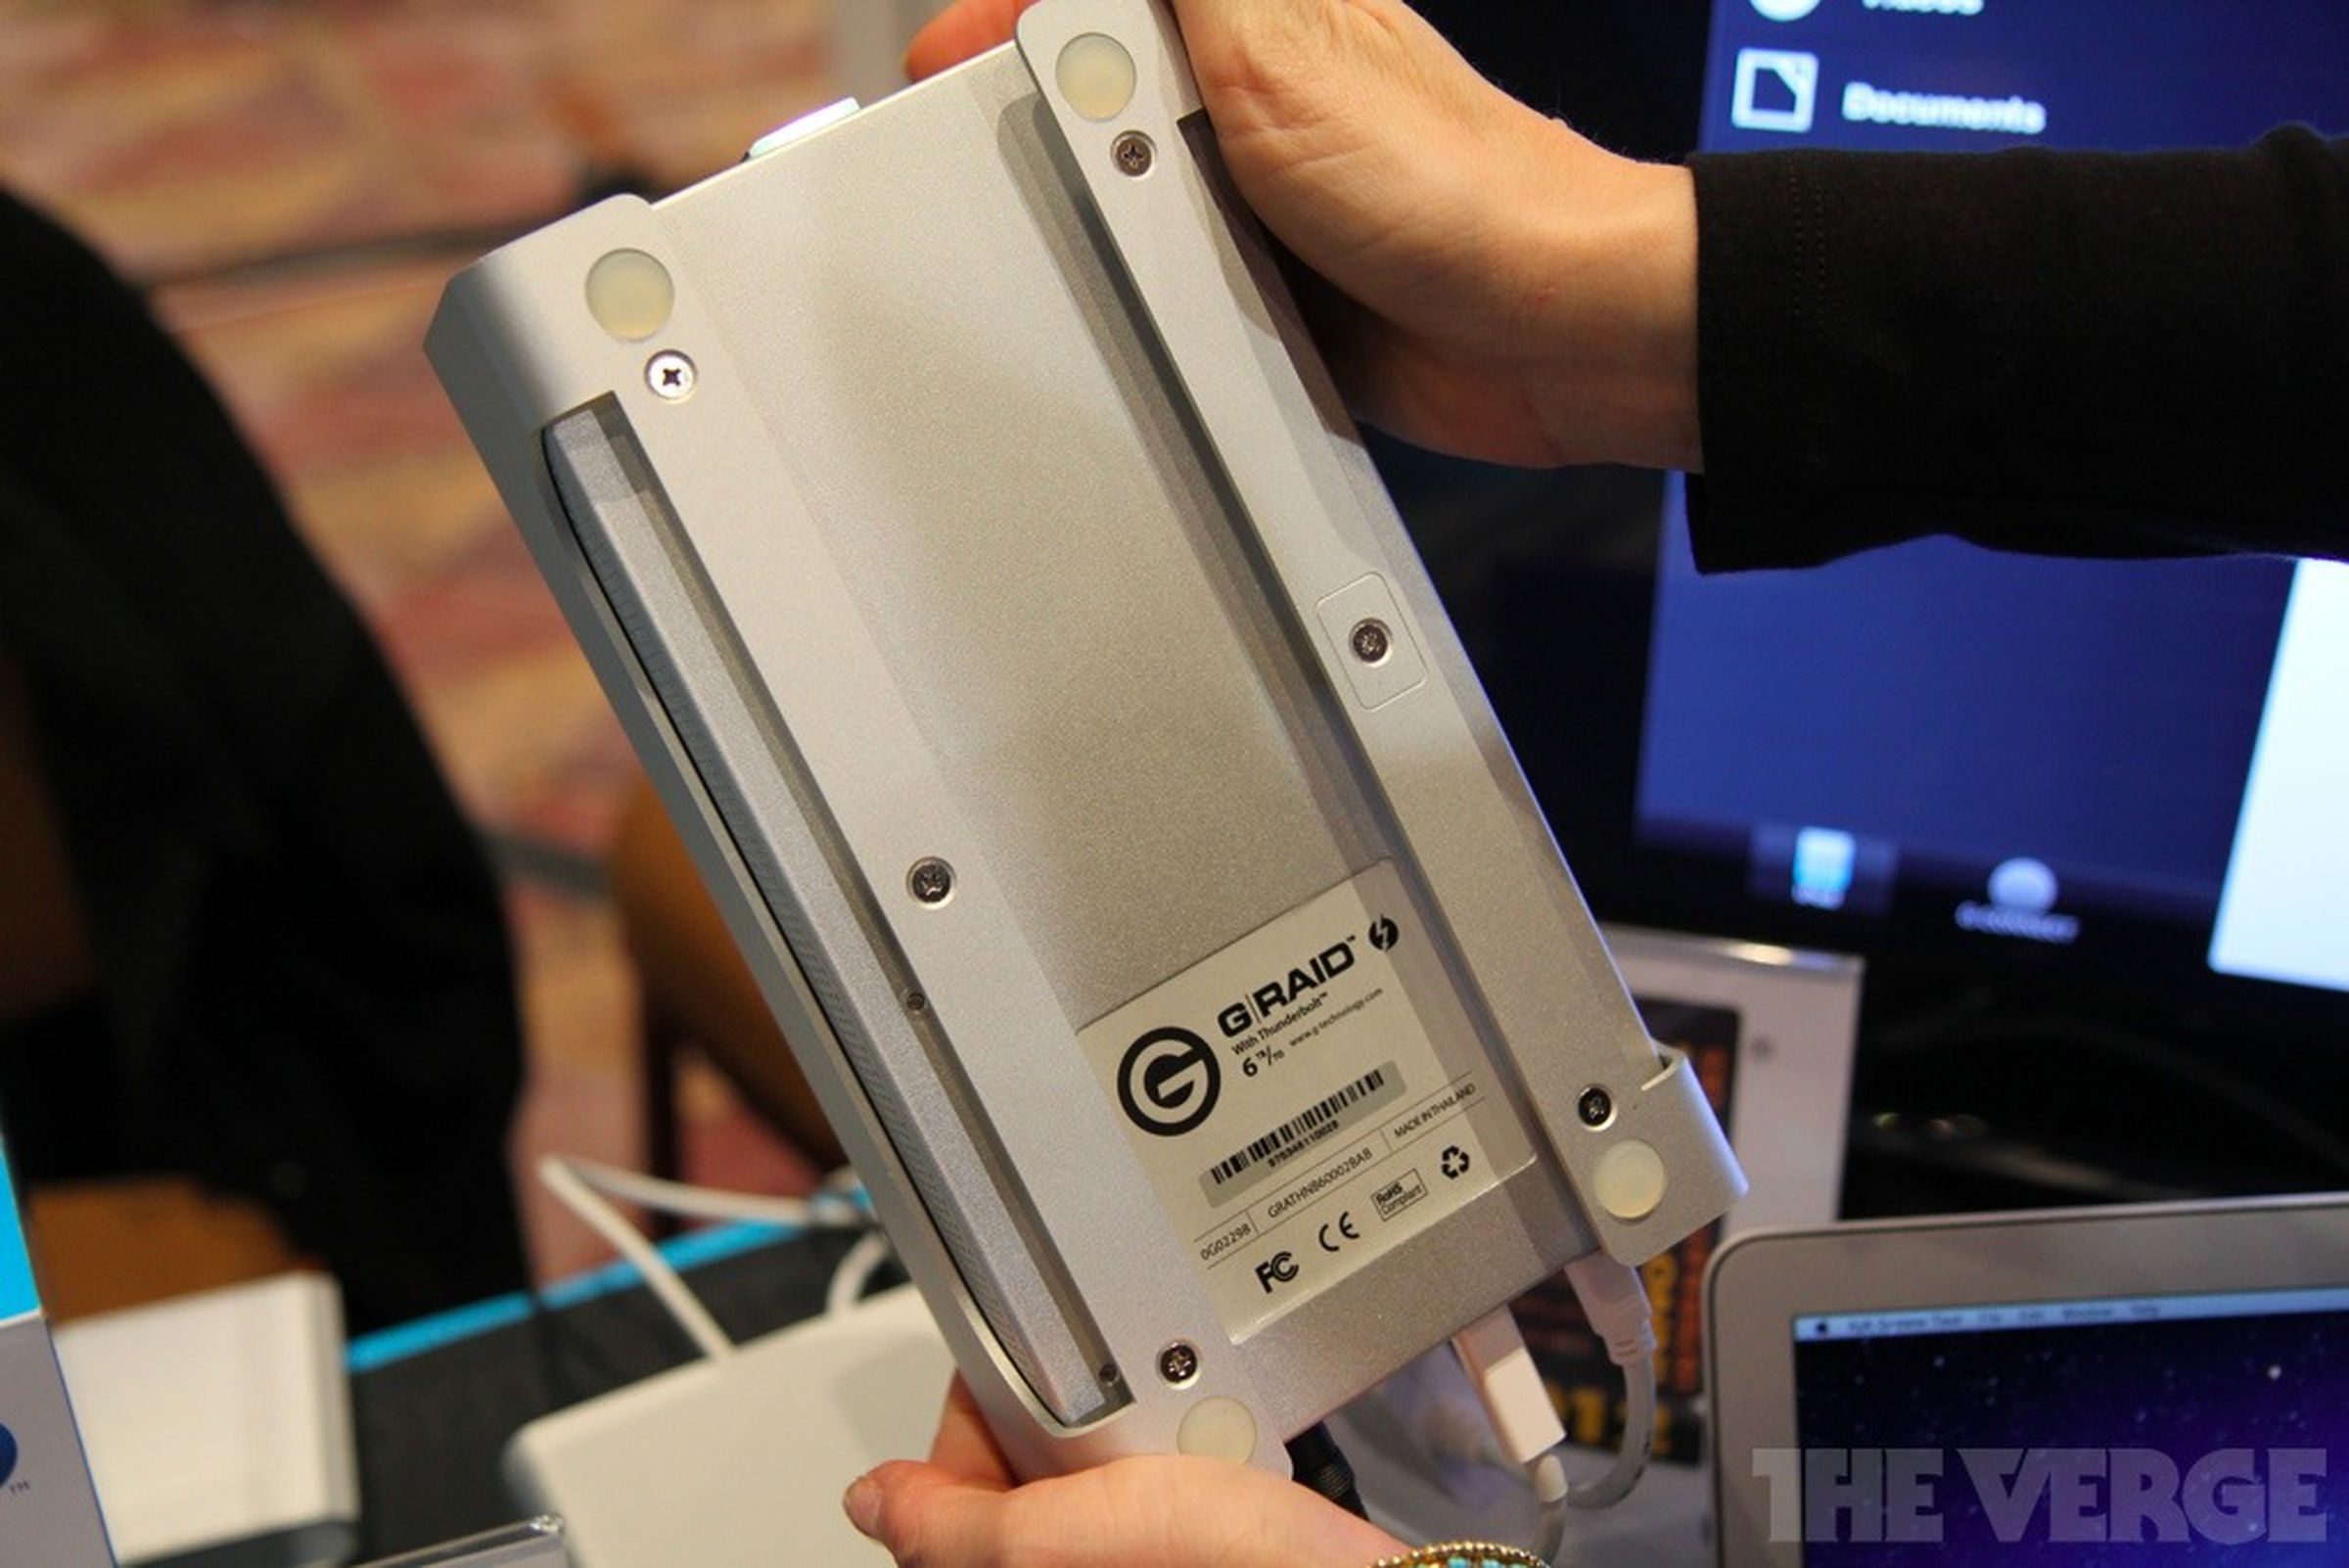 G-Technology G-Raid with Thunderbolt I/O hands-on pictures